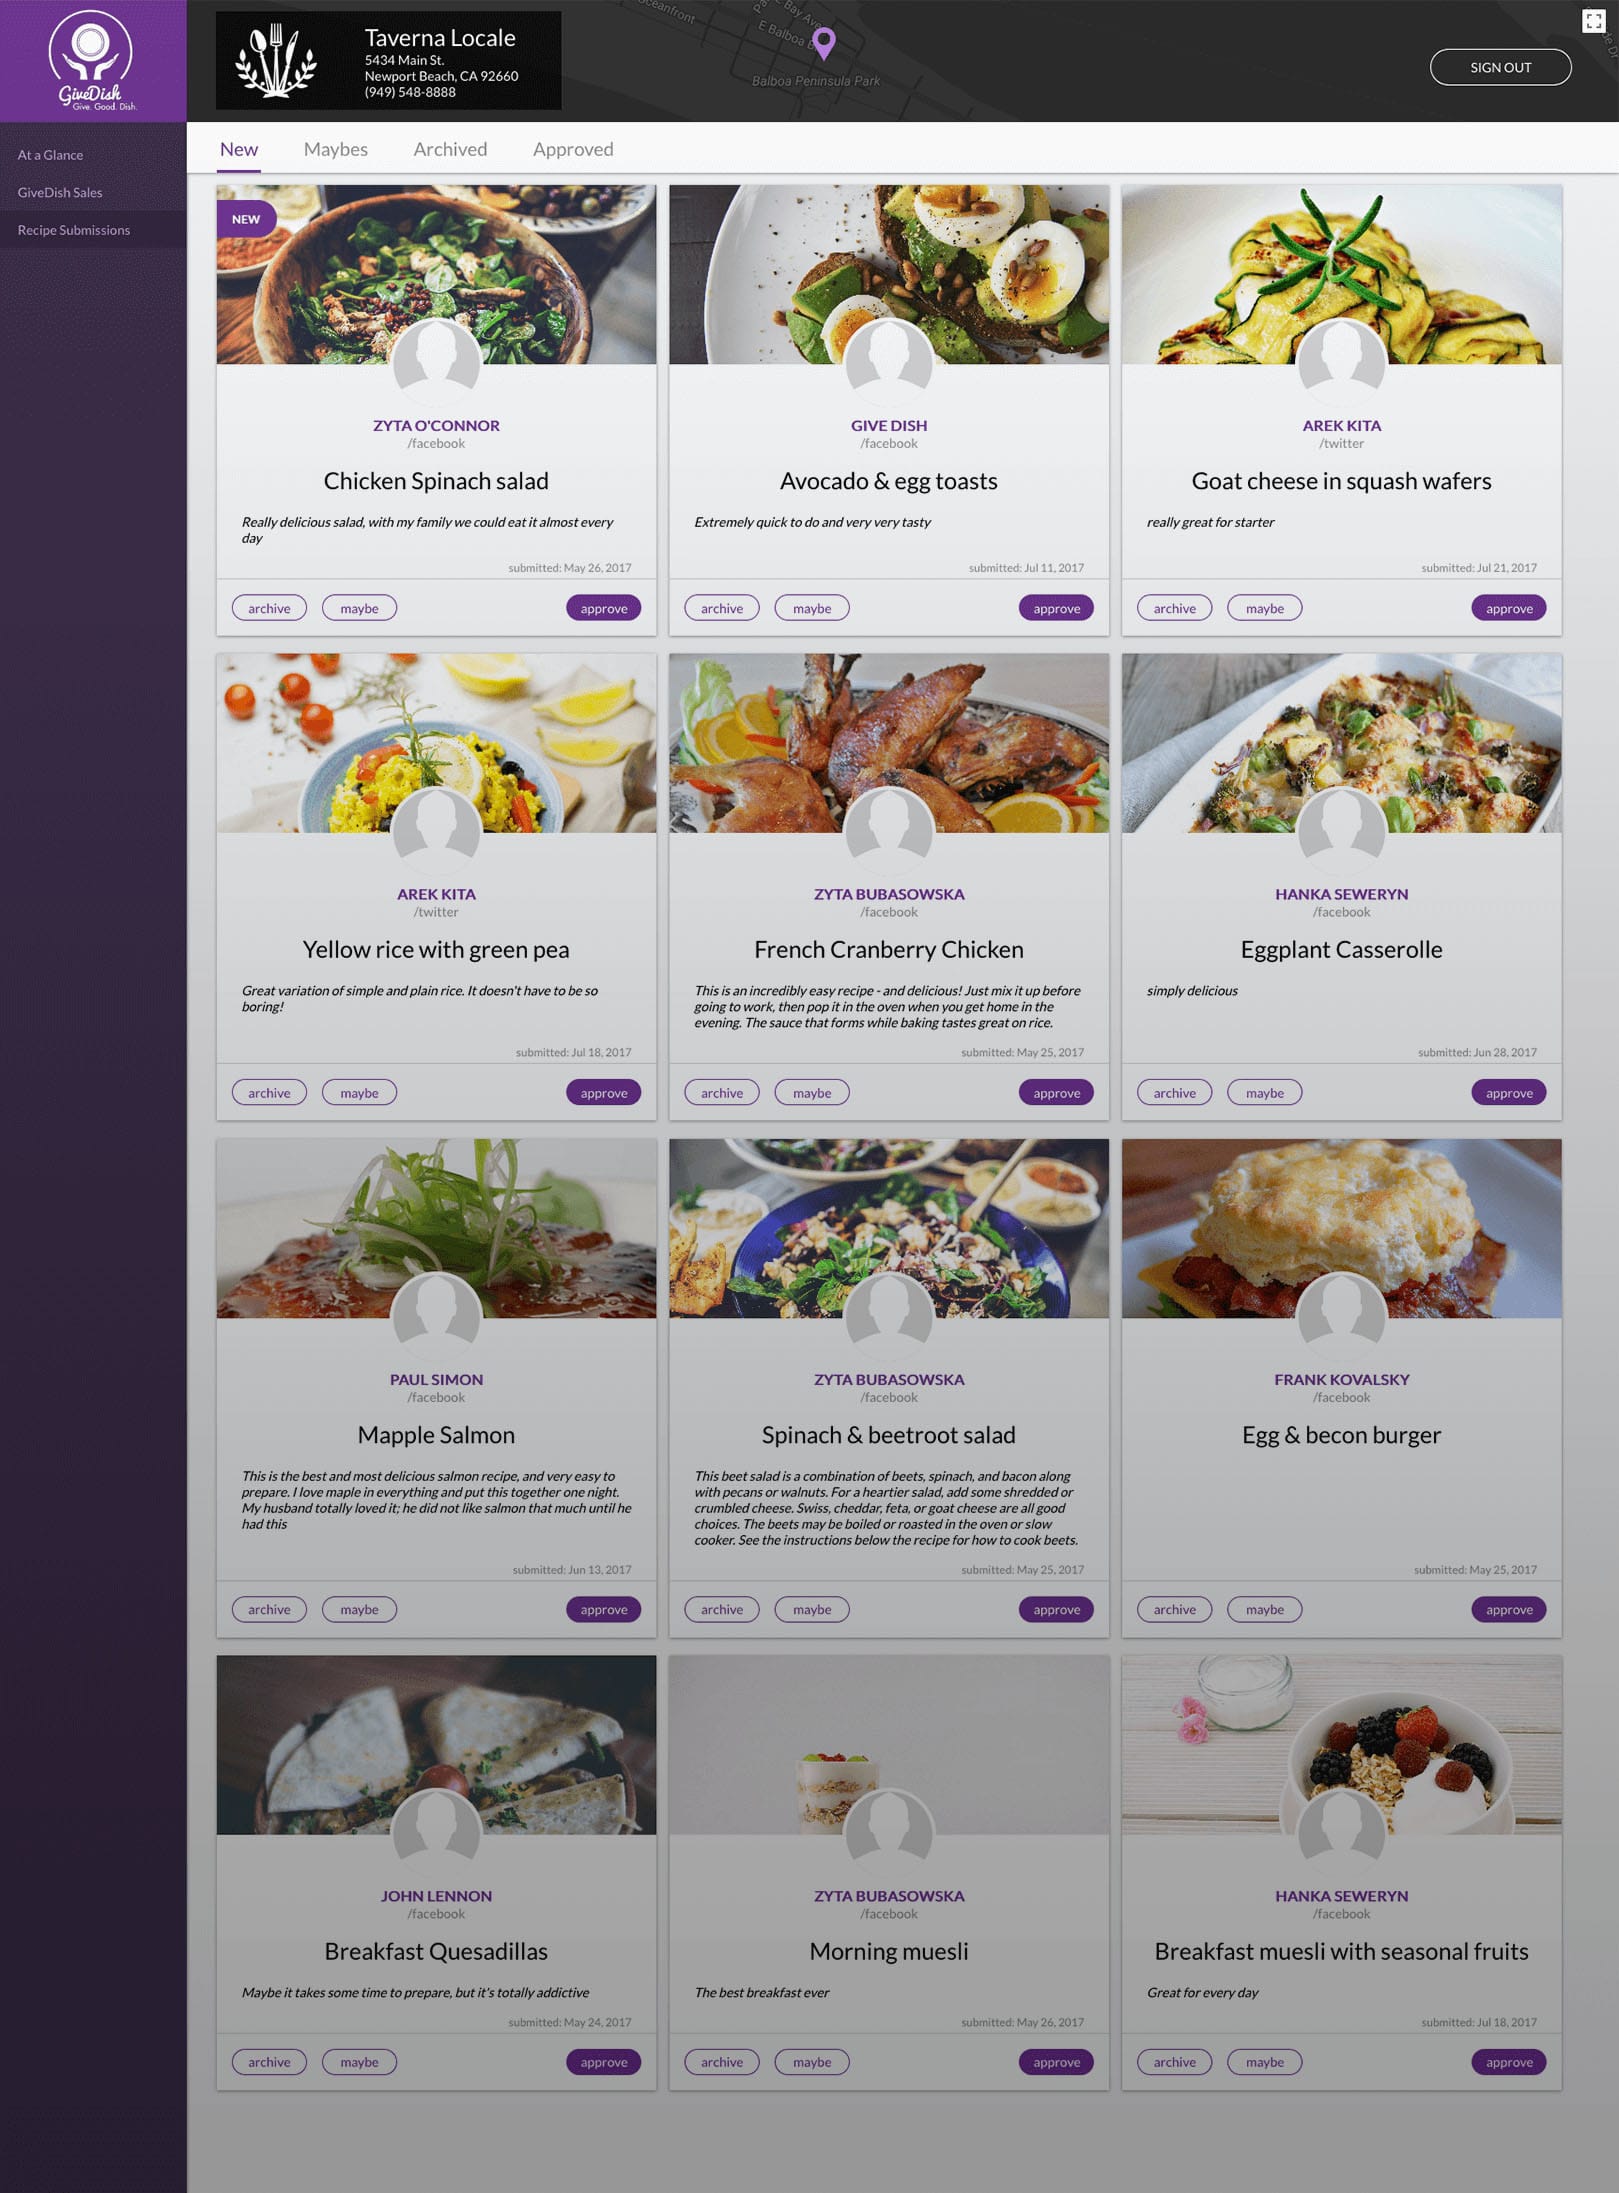 GiveDish - restaurant dashboard for managing menu items for a restaurant participating in a donation program.